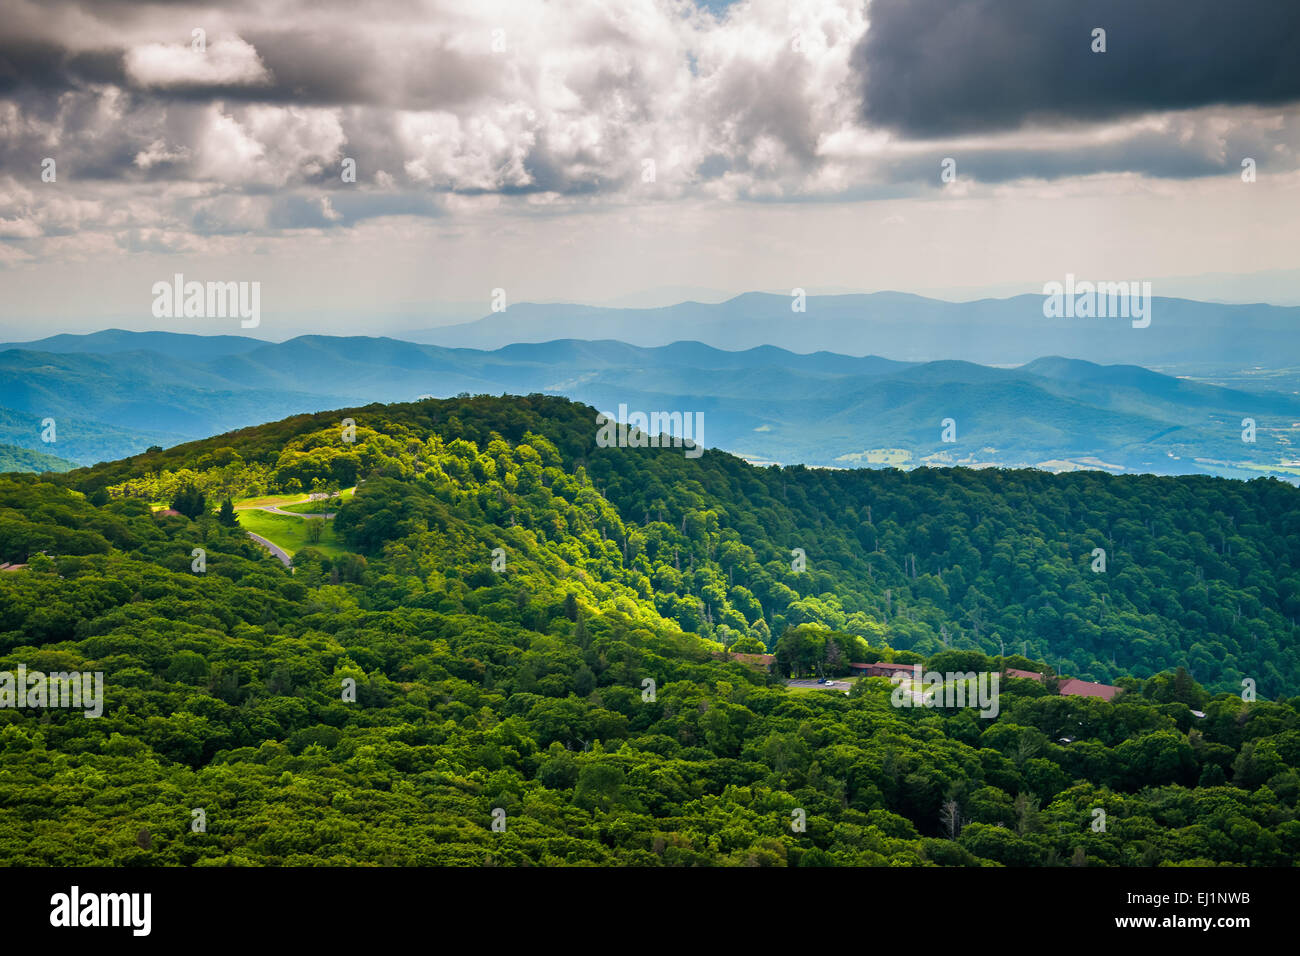 View of Skyland Resort and the Blue Ridge Mountains from Stony Man Mountain in Shenandoah National Park, Virginia. Stock Photo